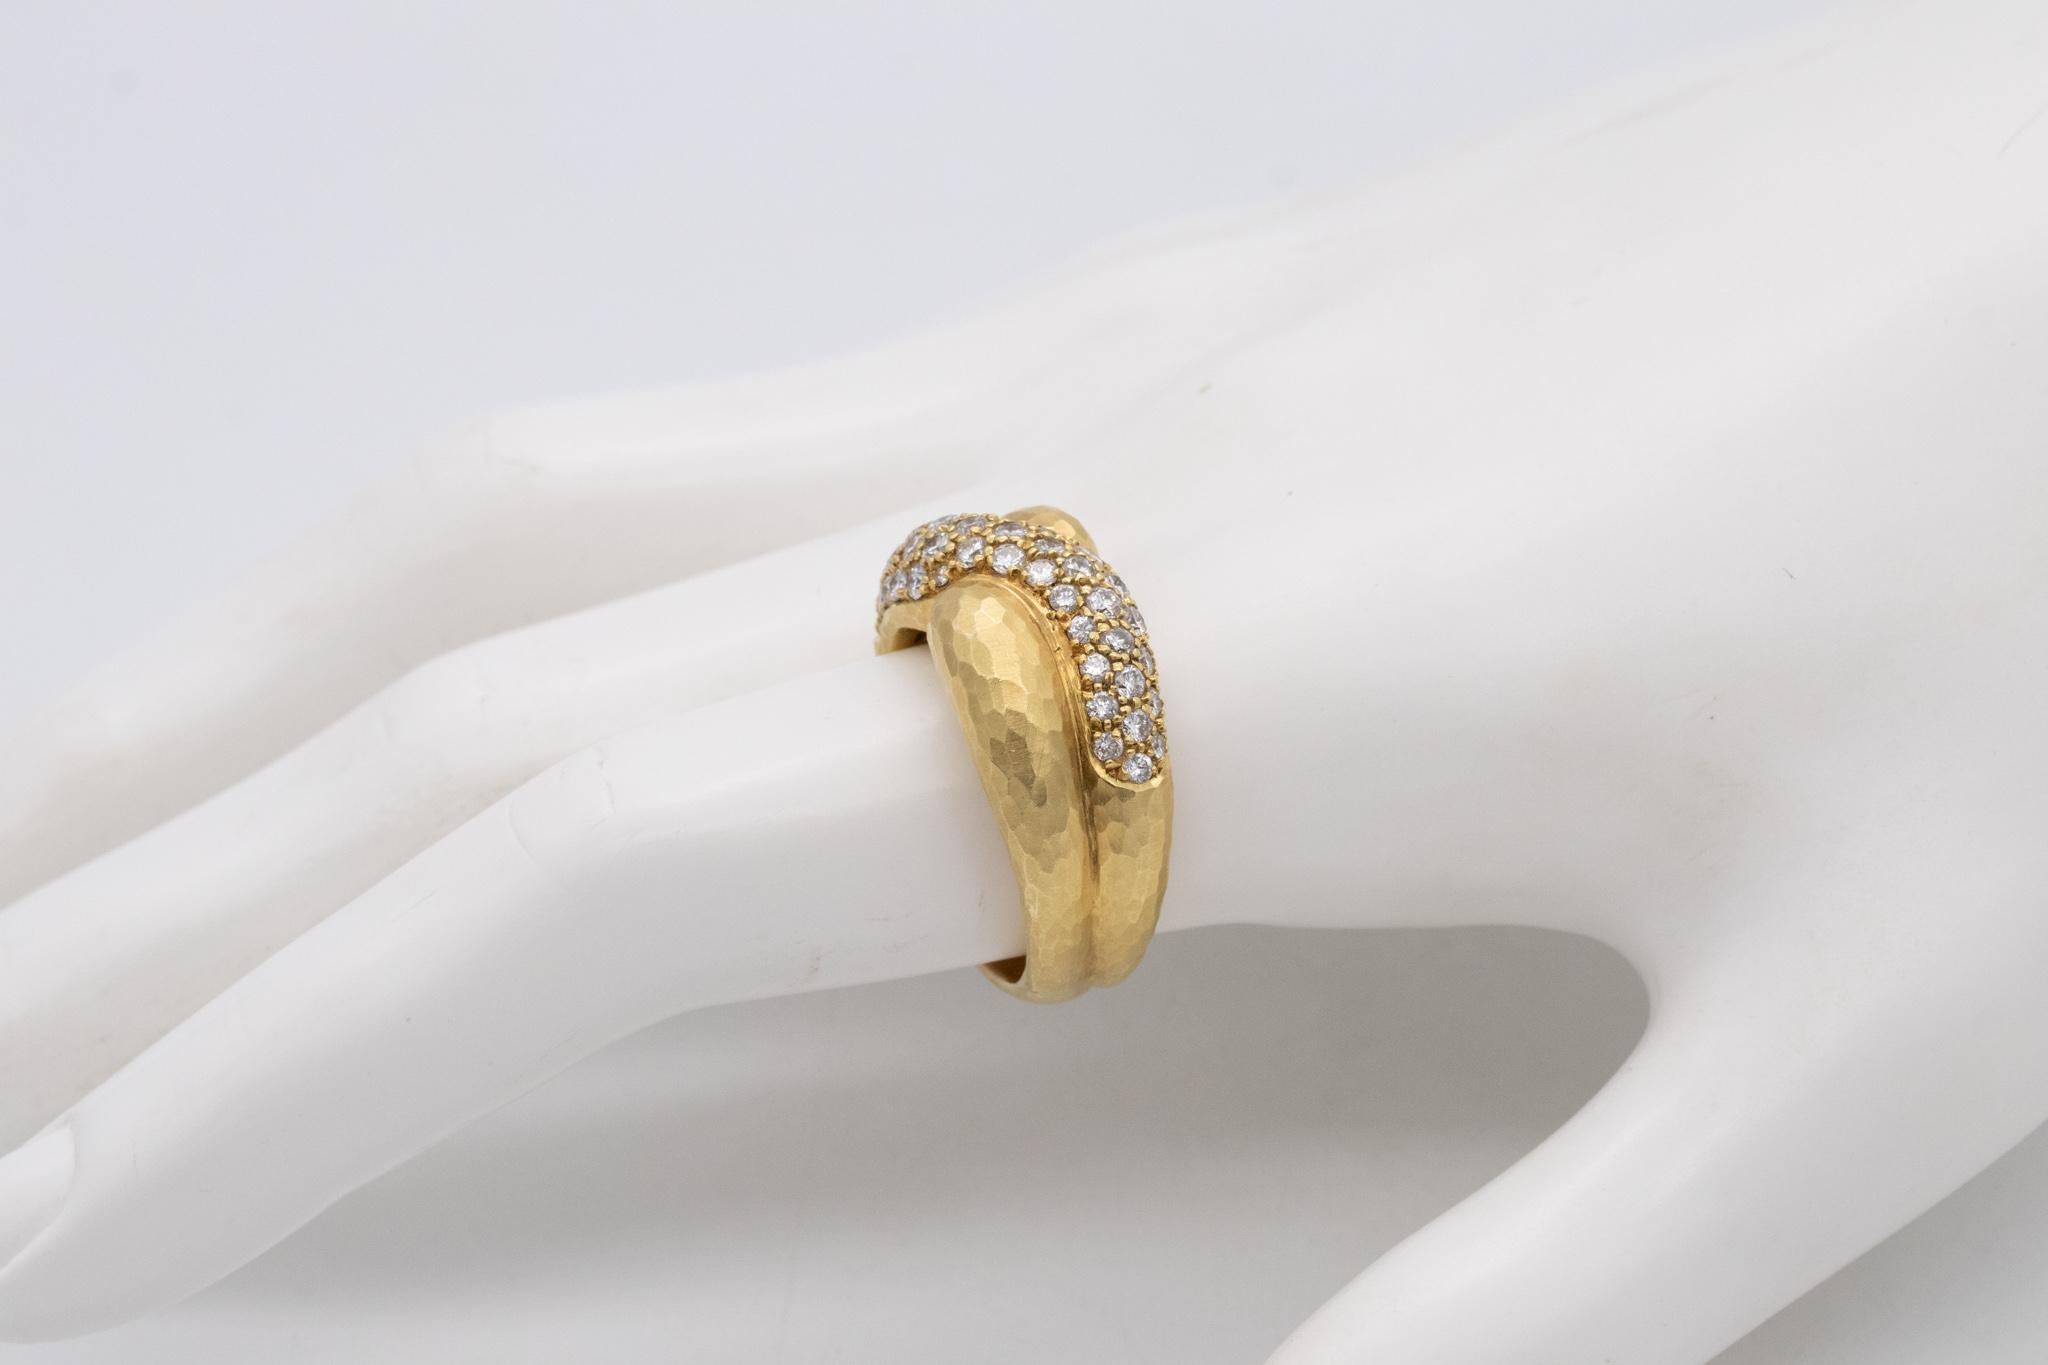 Modernist Andrew Grima Rare Hammered Ring in 18Kt Yellow Gold with 1.50 Ctw in VS Diamonds